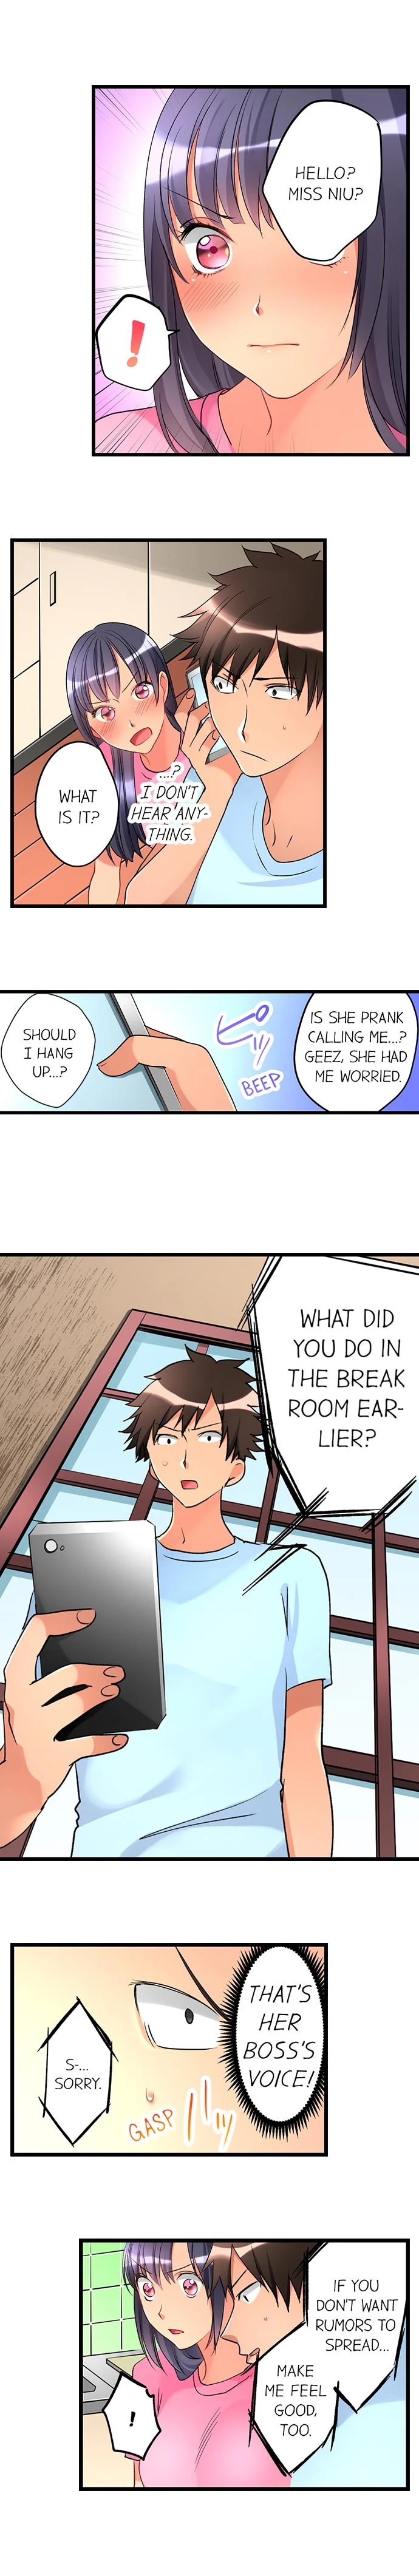 What She Fell On Was The Tip Of My Dick - Chapter 32 Page 2